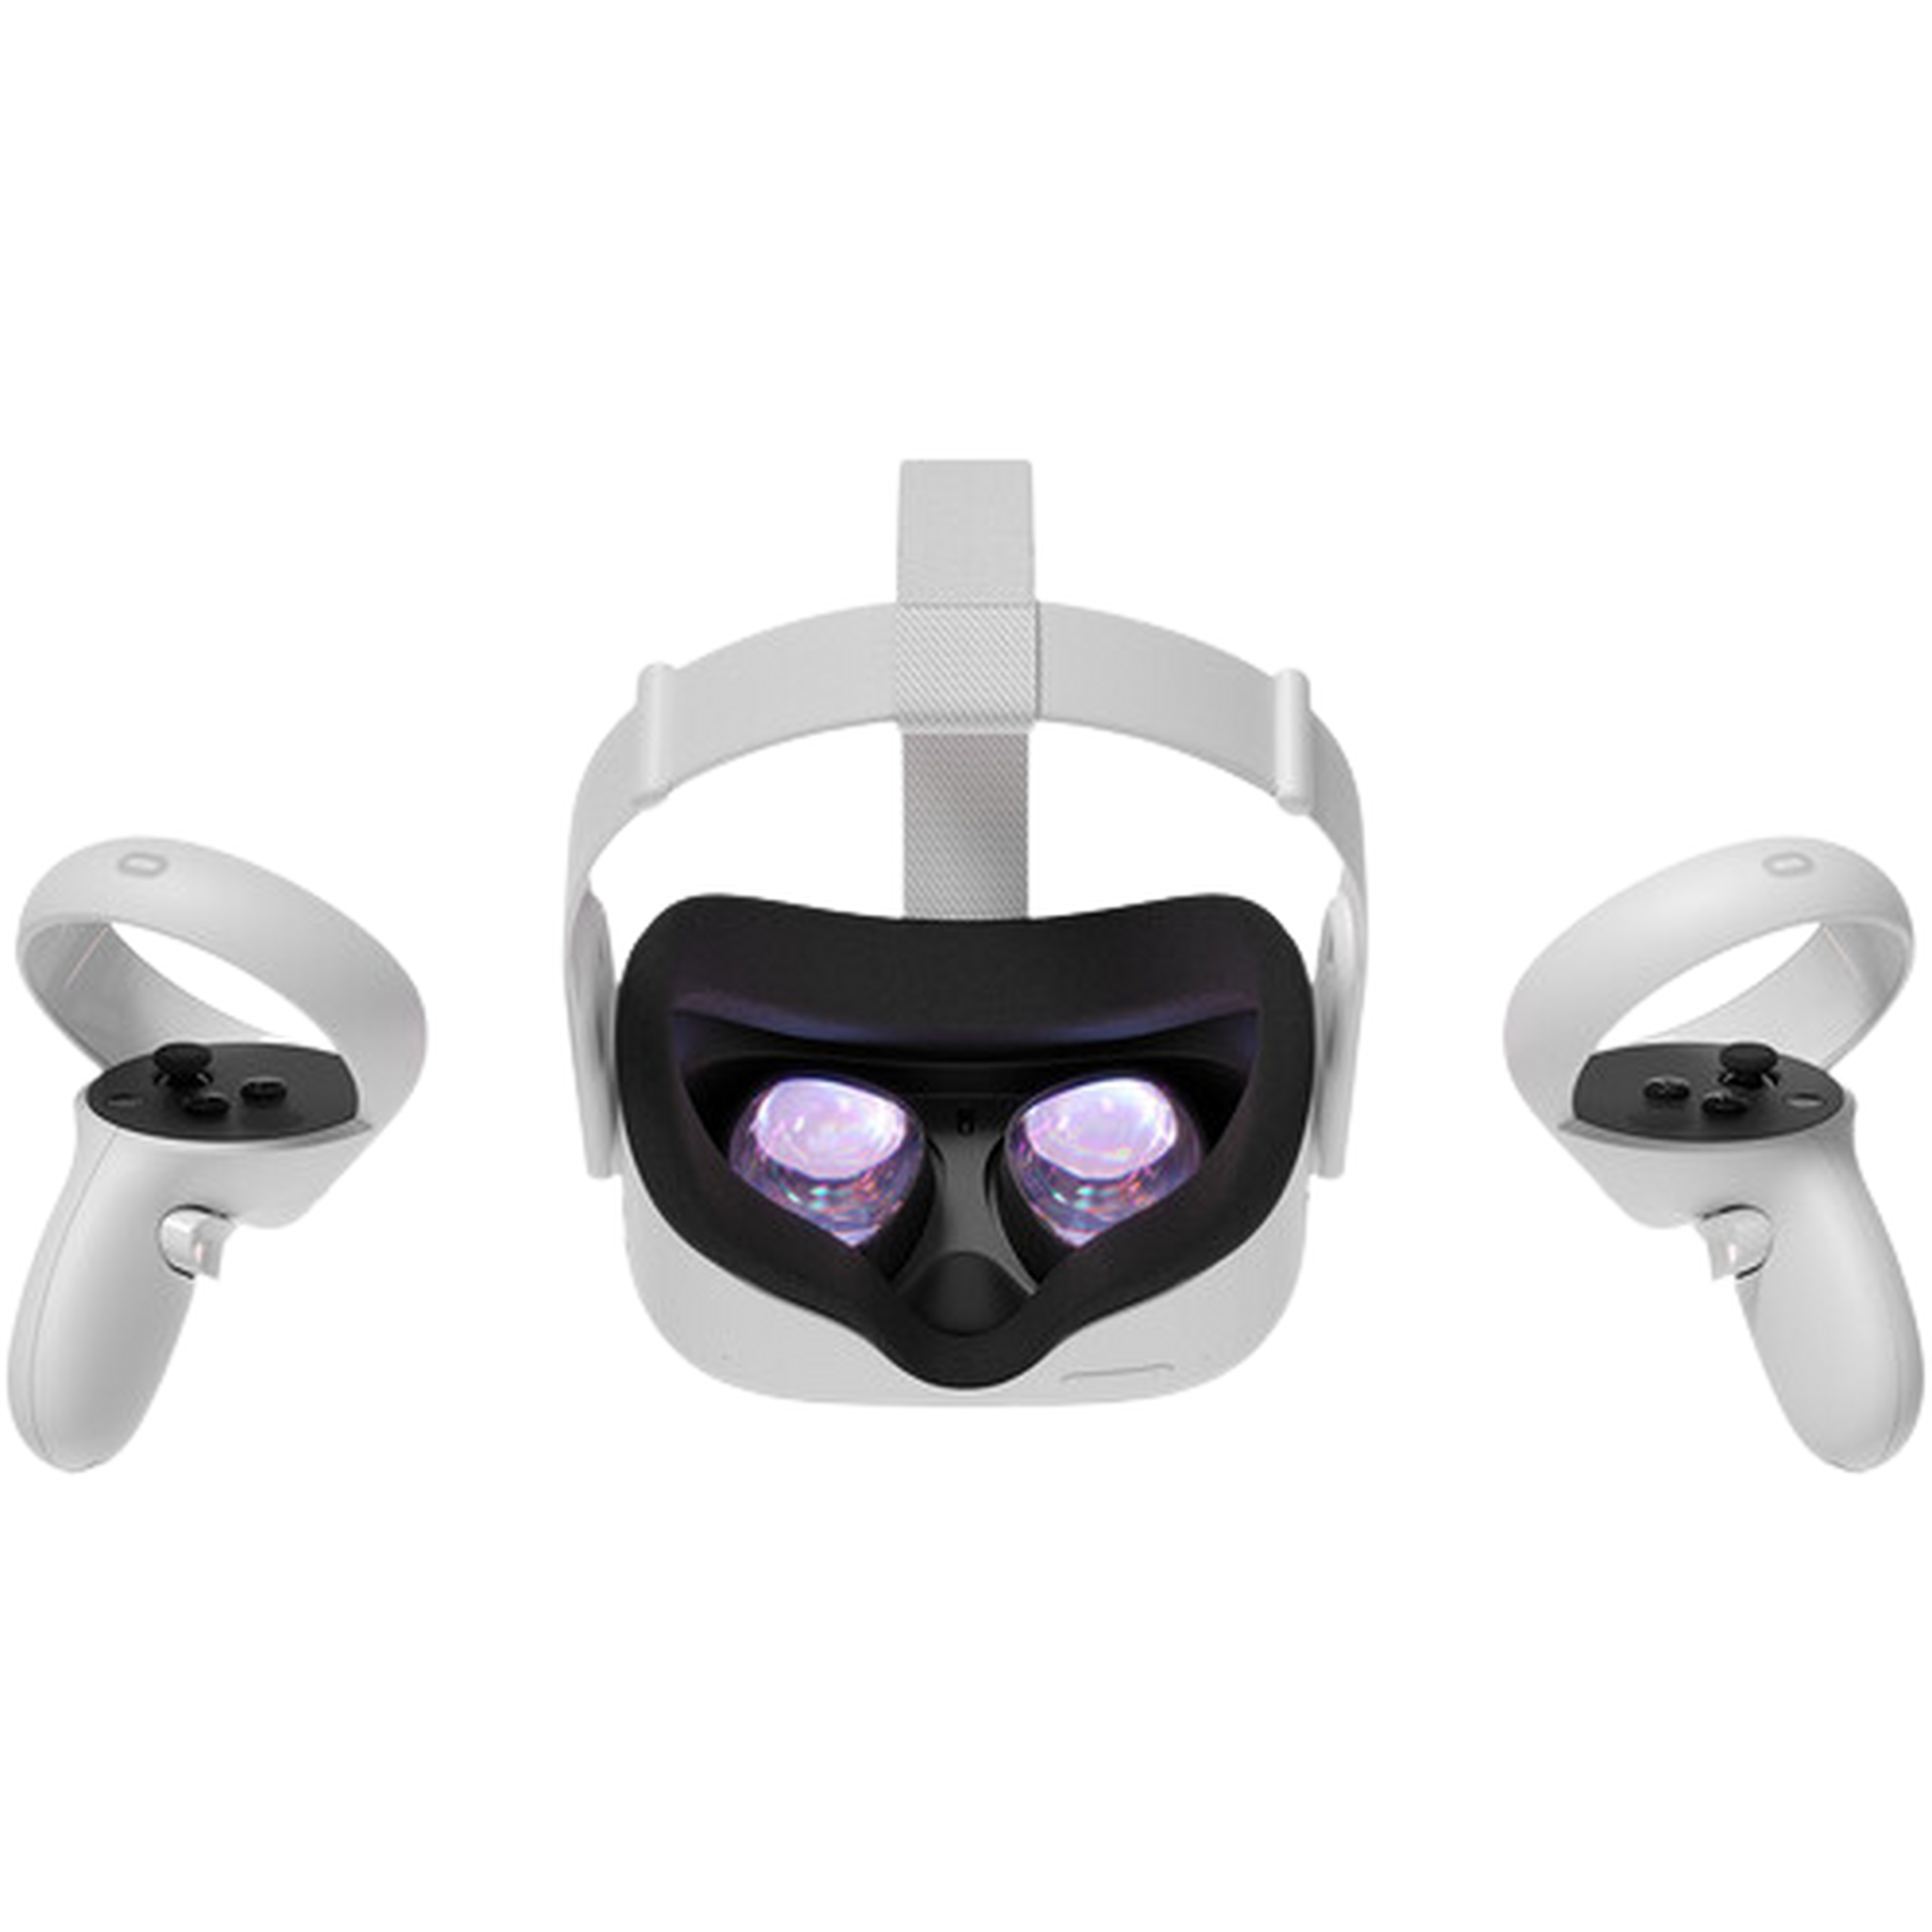 Oculus Quest 2 Advanced All-In-One Virtual Reality Headset (256GB)